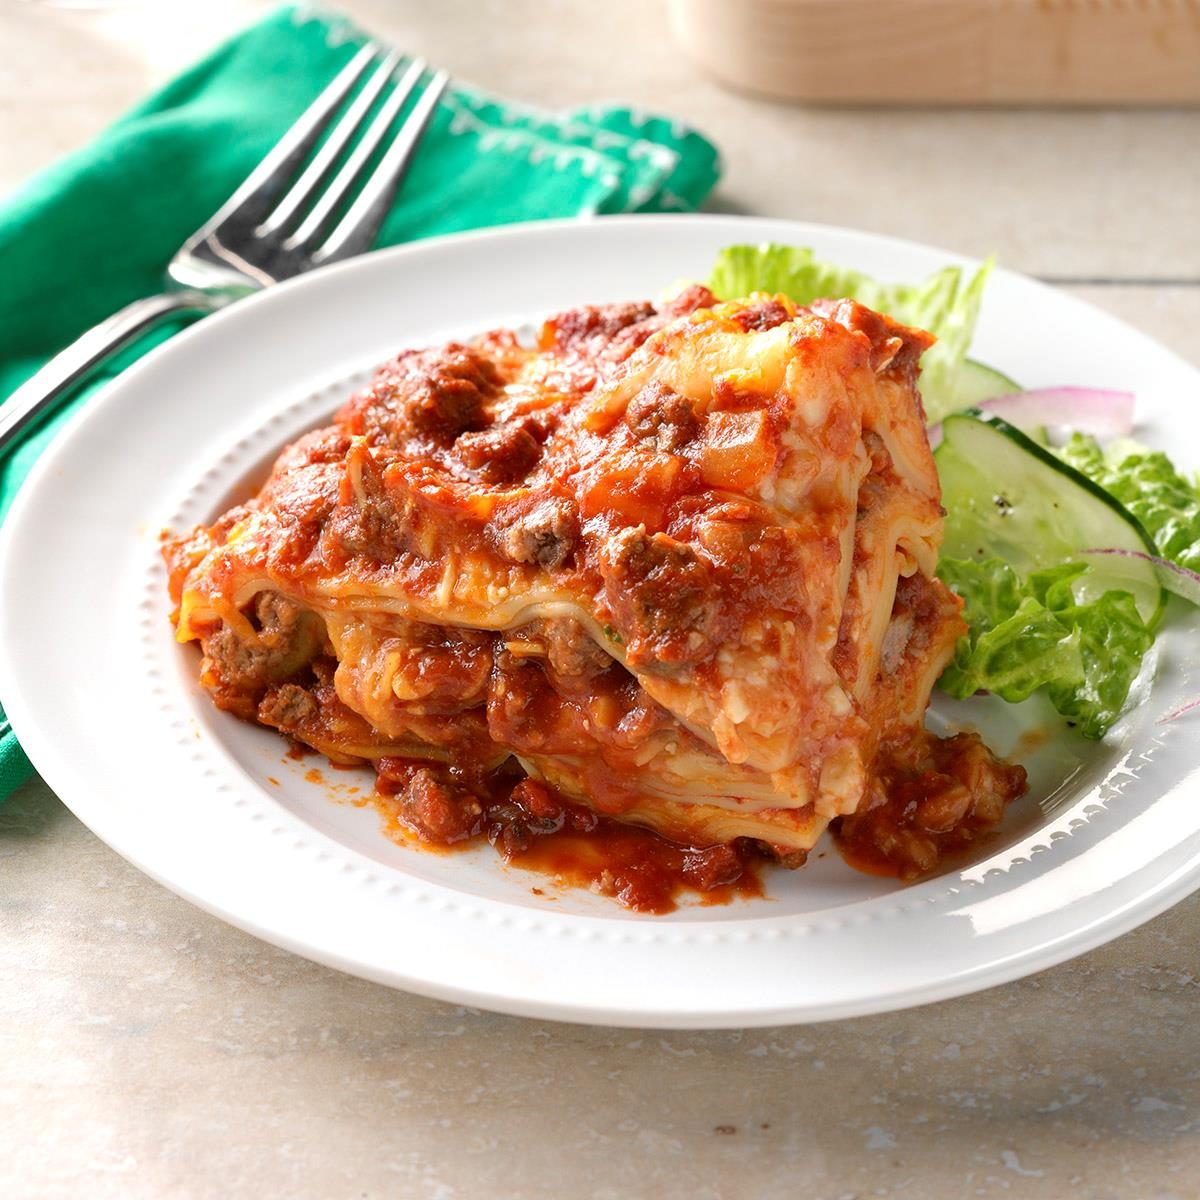 Slow-Cooker Lasagna Recipe: How to Make It